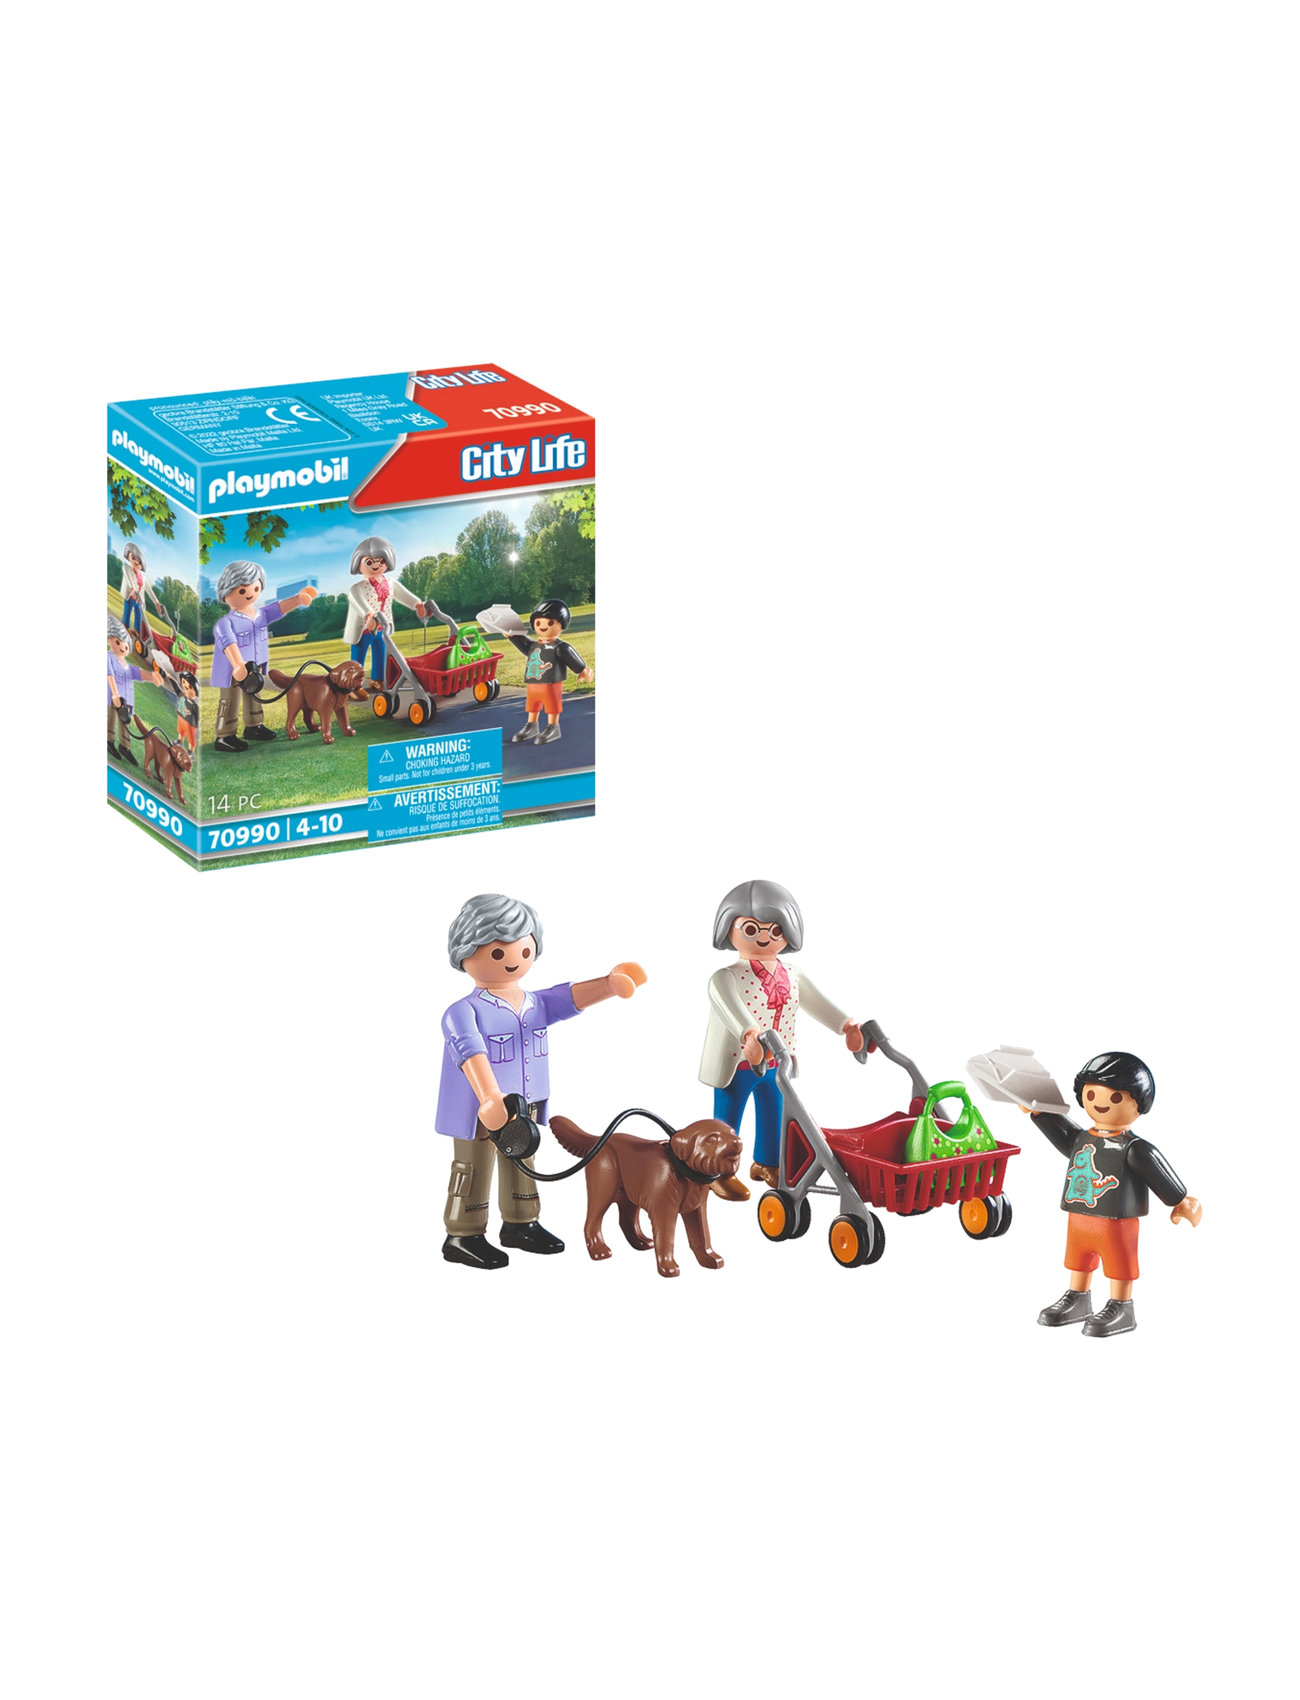 PLAYMOBIL City Life 70988 Children's Room, Toy for Children from 4 Years